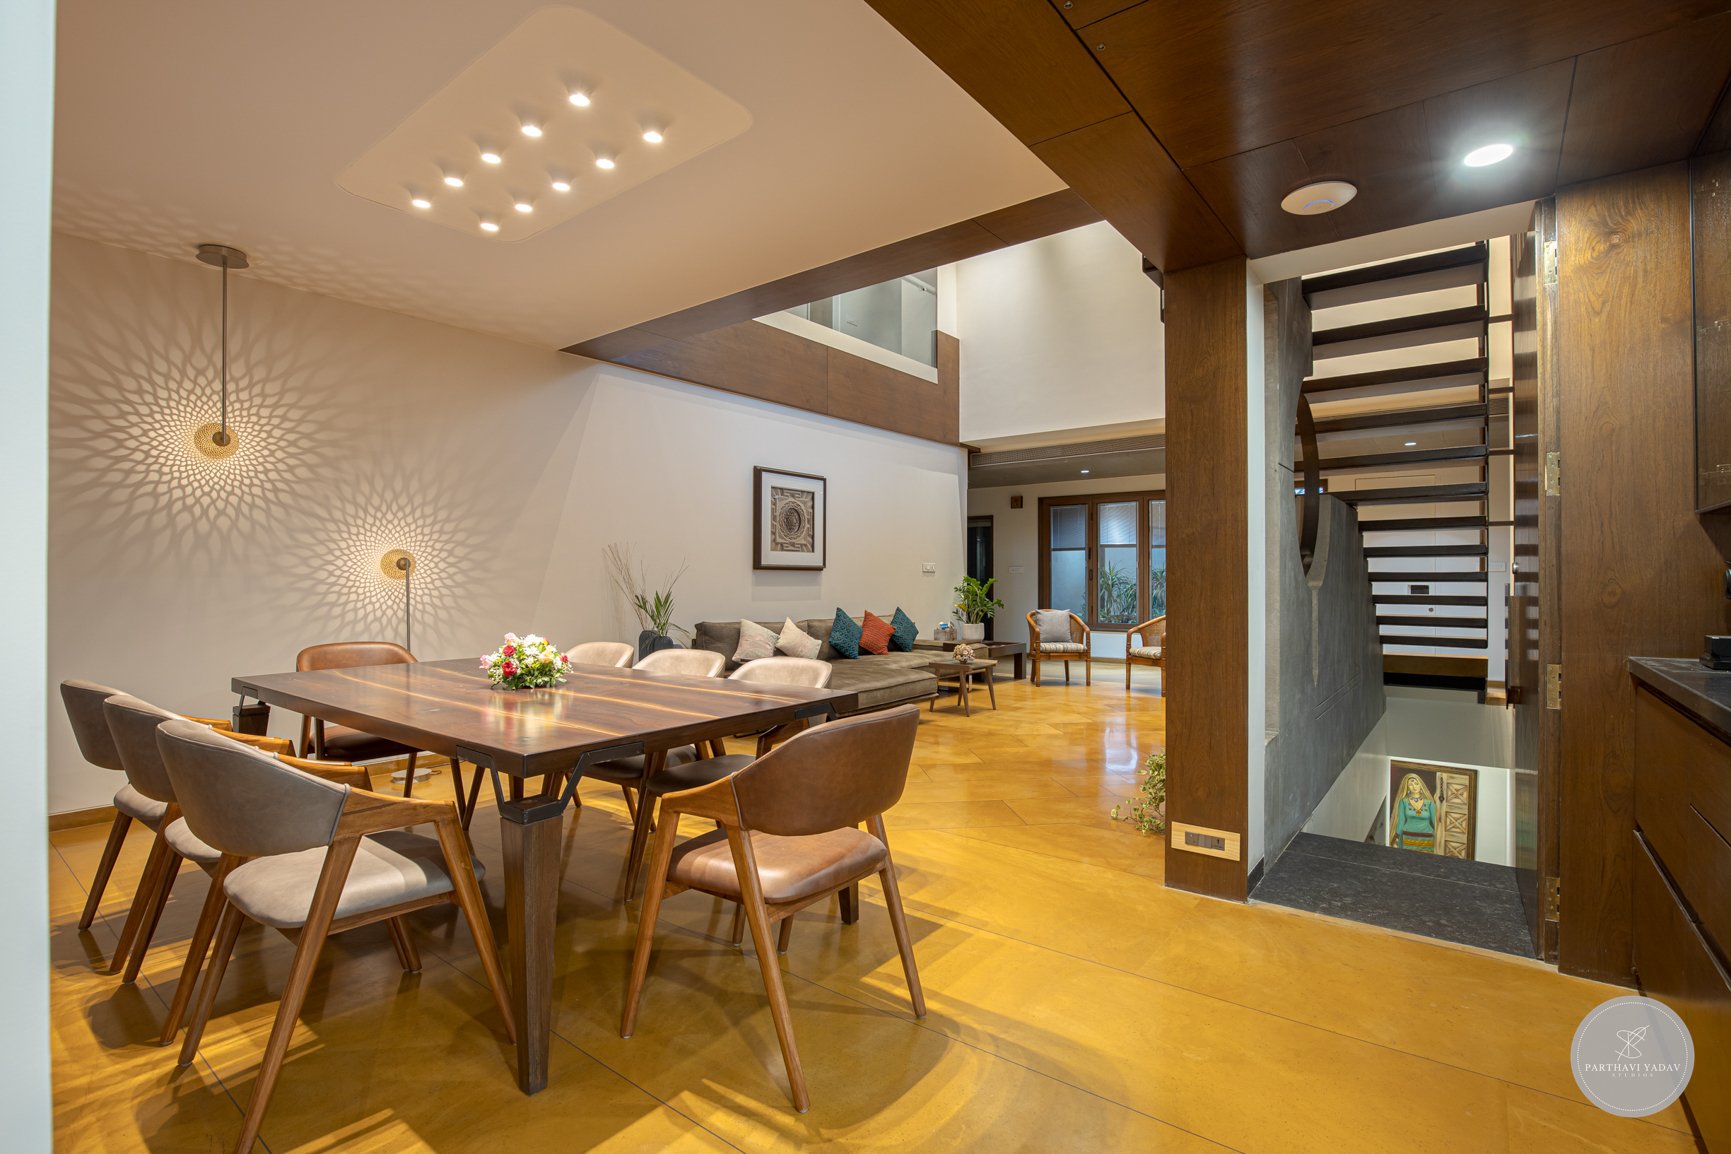 best interior photographer in pune bangalore - custom wooden dining table with award winning lamps and ceiling lights with stairs joining the living room.jpg